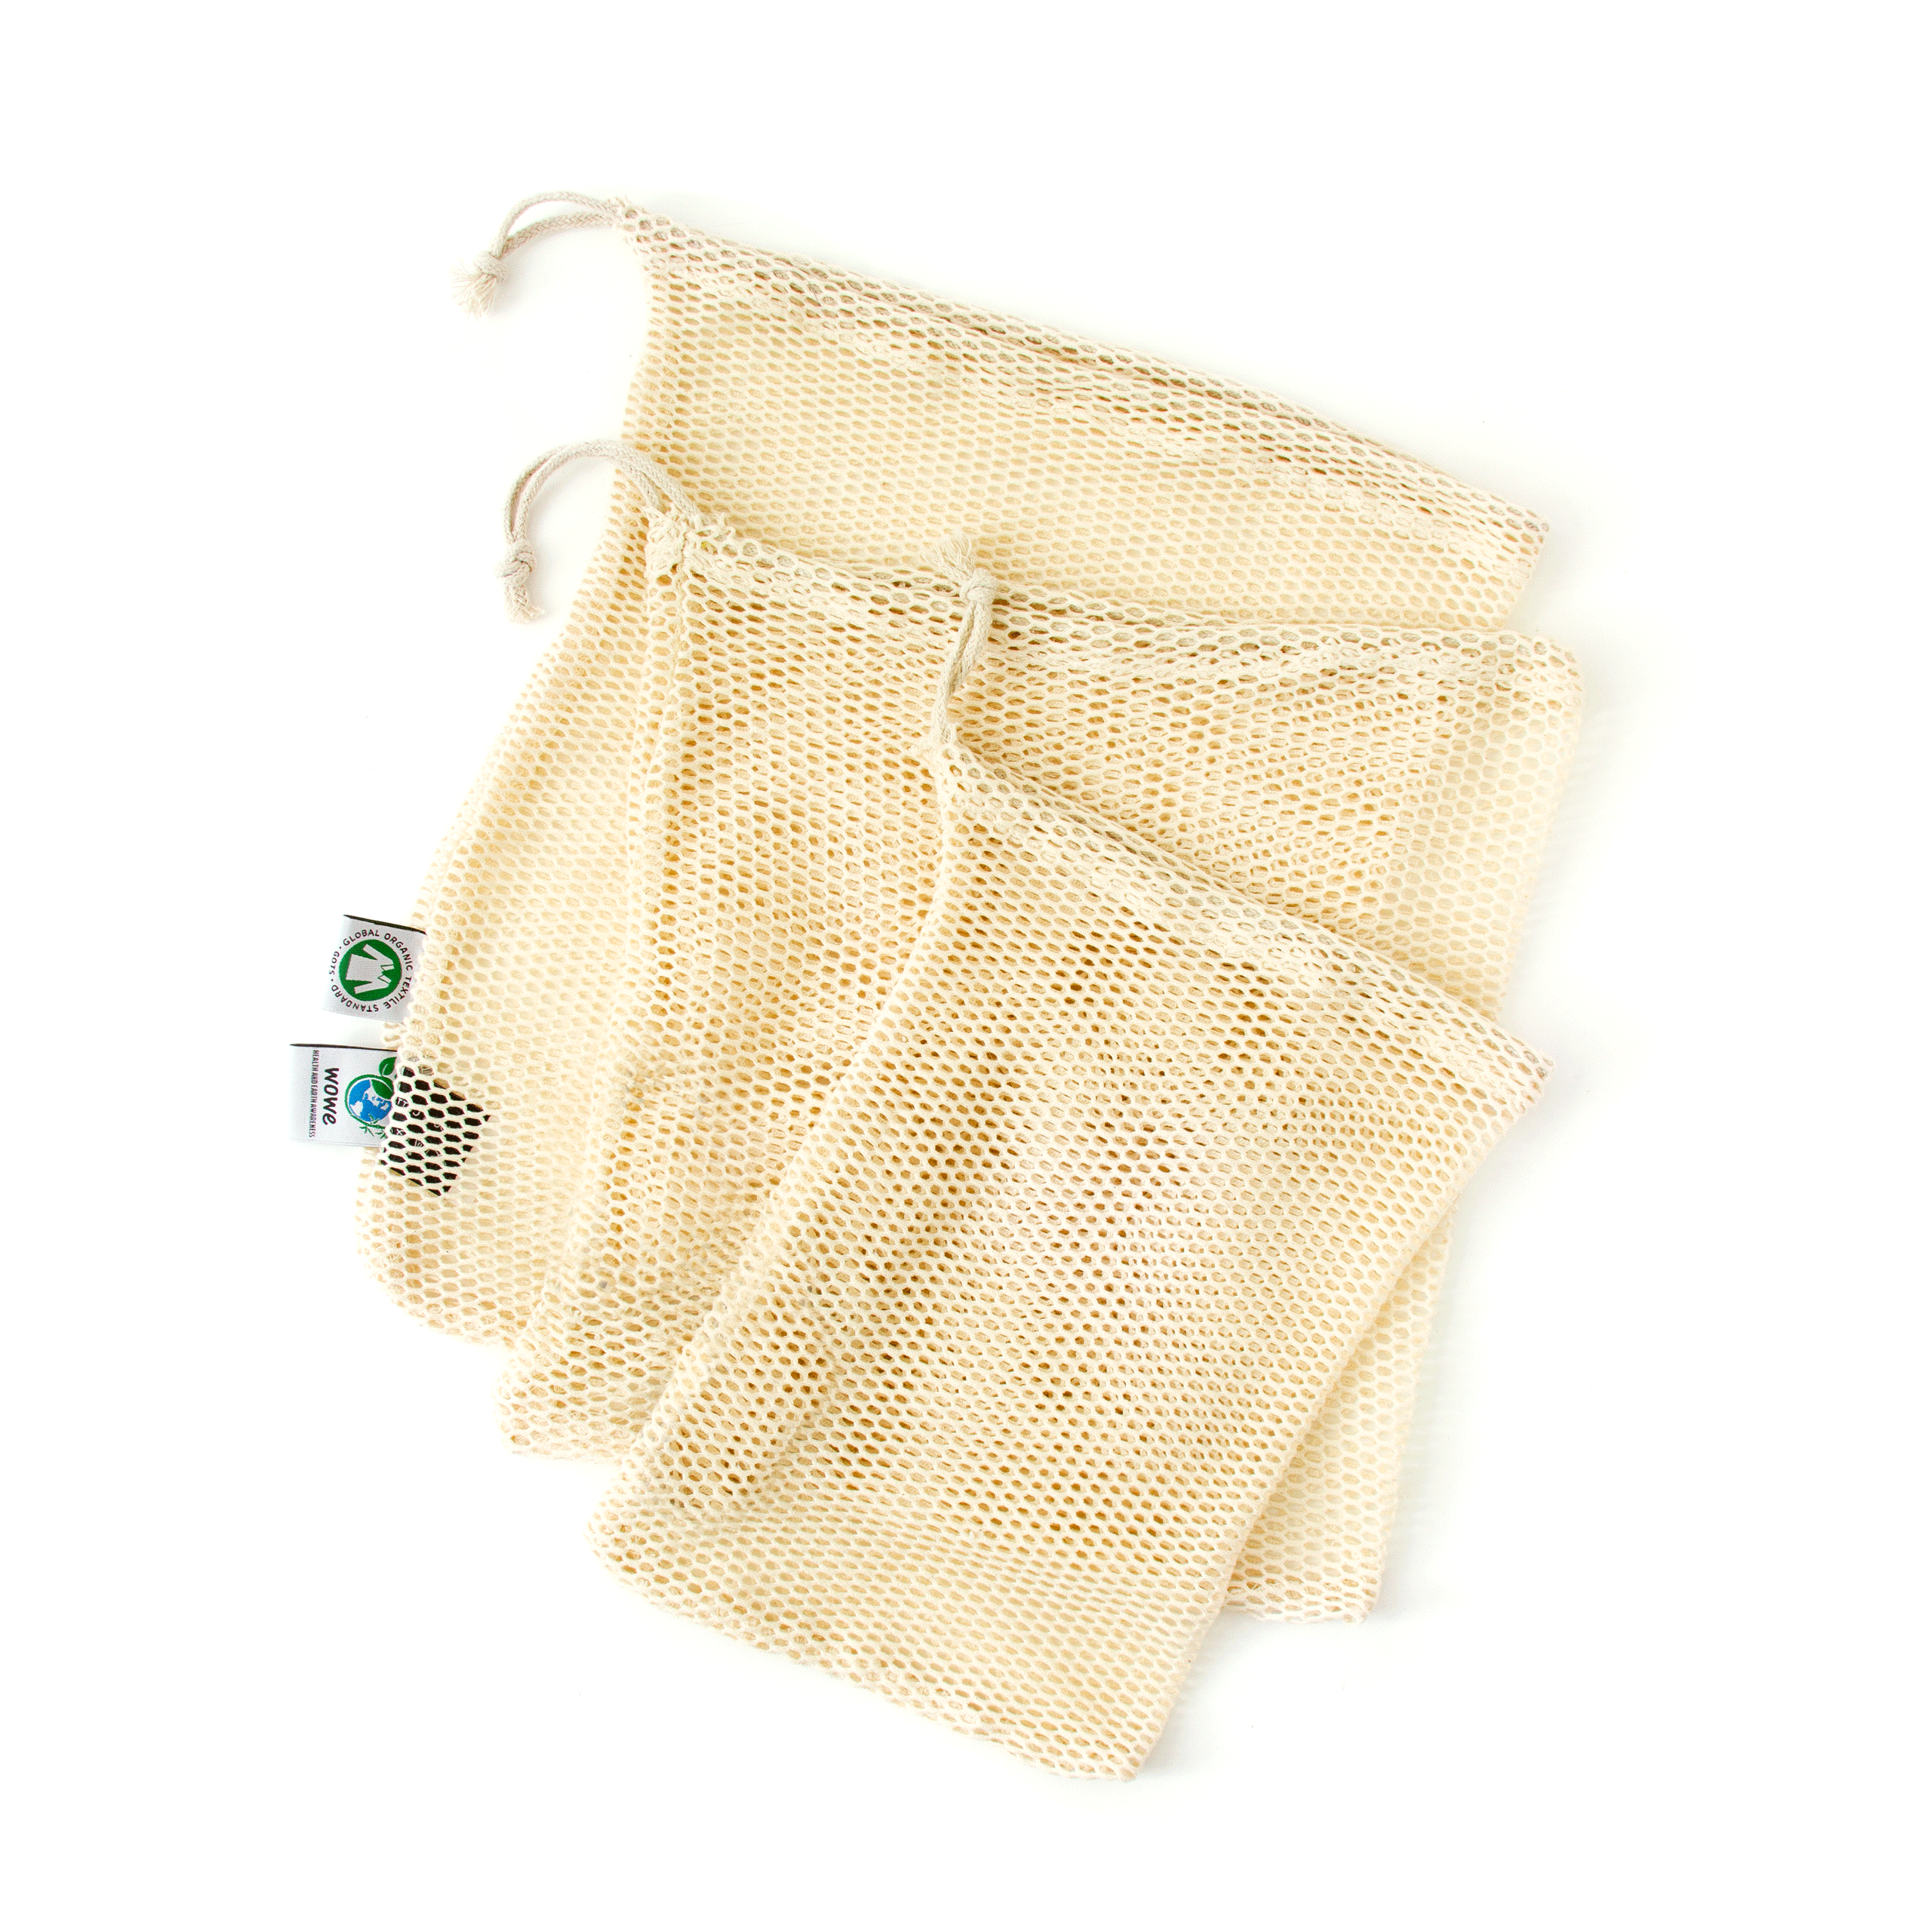 Wowe | Cotton Mesh Product Bag, produce bags, Wowe, Defiance Outdoor Gear Co.